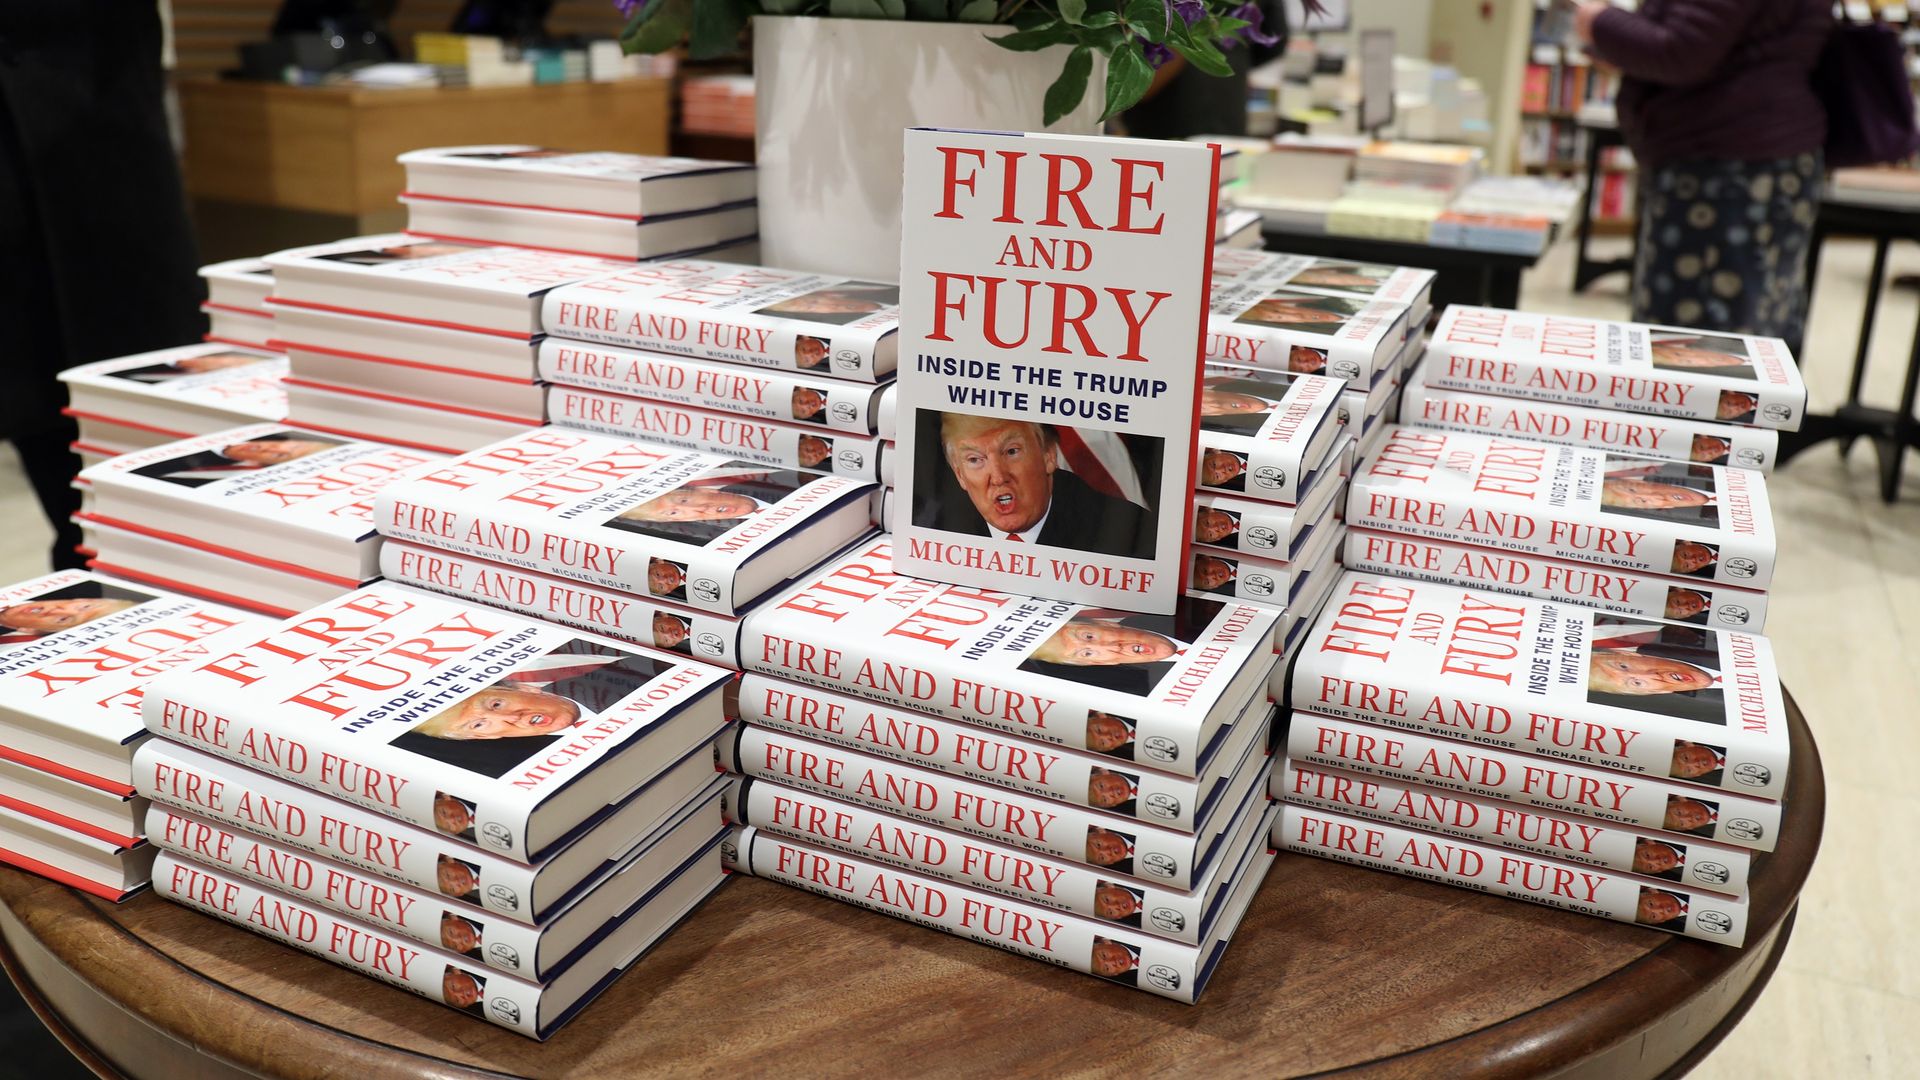  An in-store display at Waterstone's Piccadilly shows copies of one of the UK's first consignments of 'Fire and Fury'